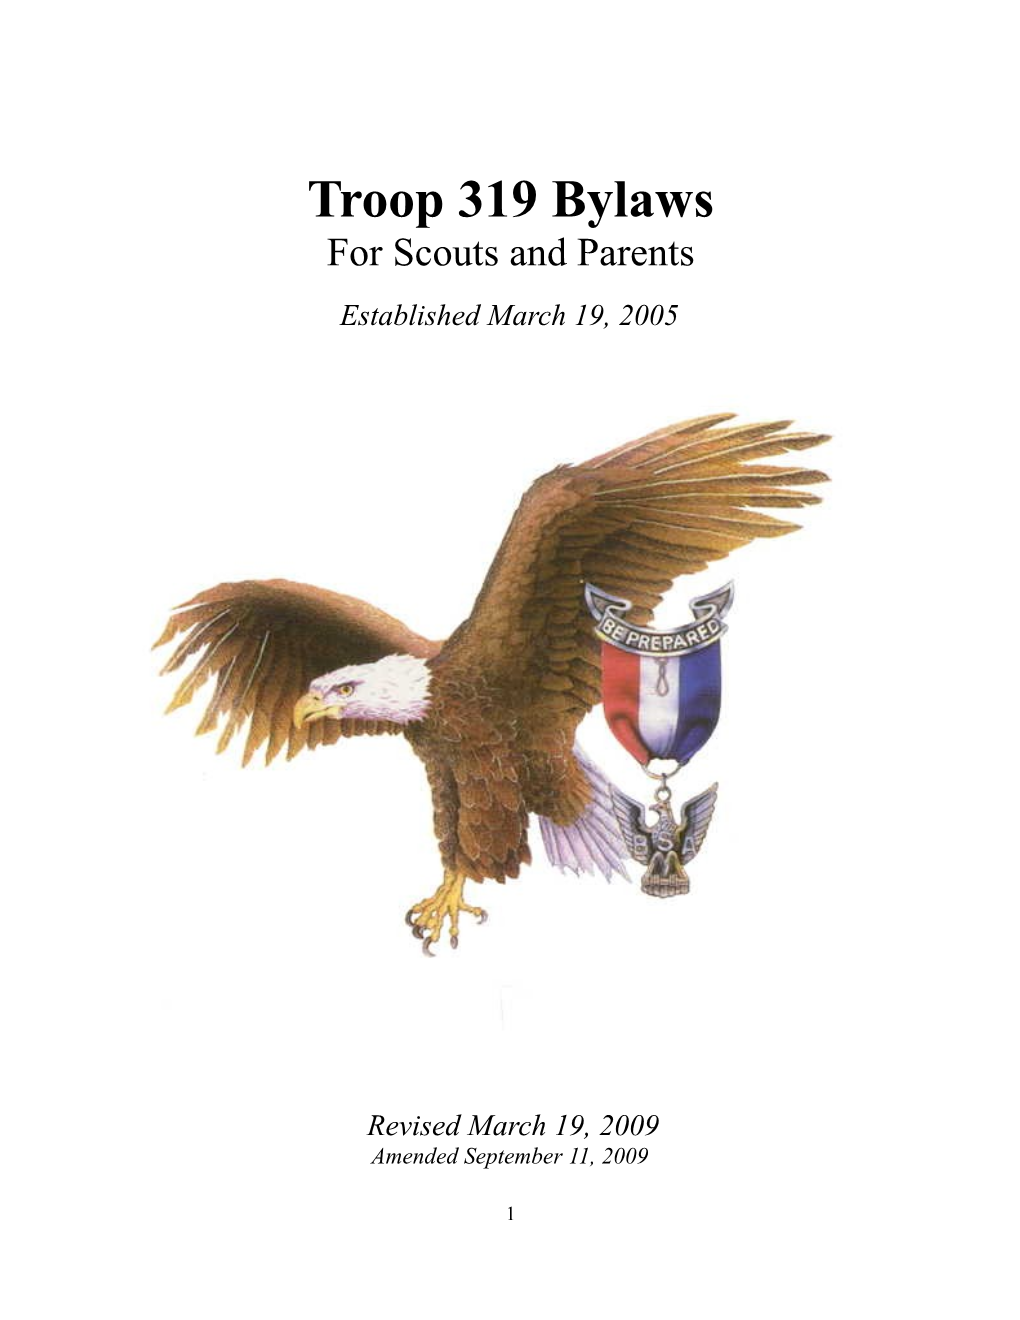 Troop 319 Bylaws for Scouts and Parents Established March 19, 2005